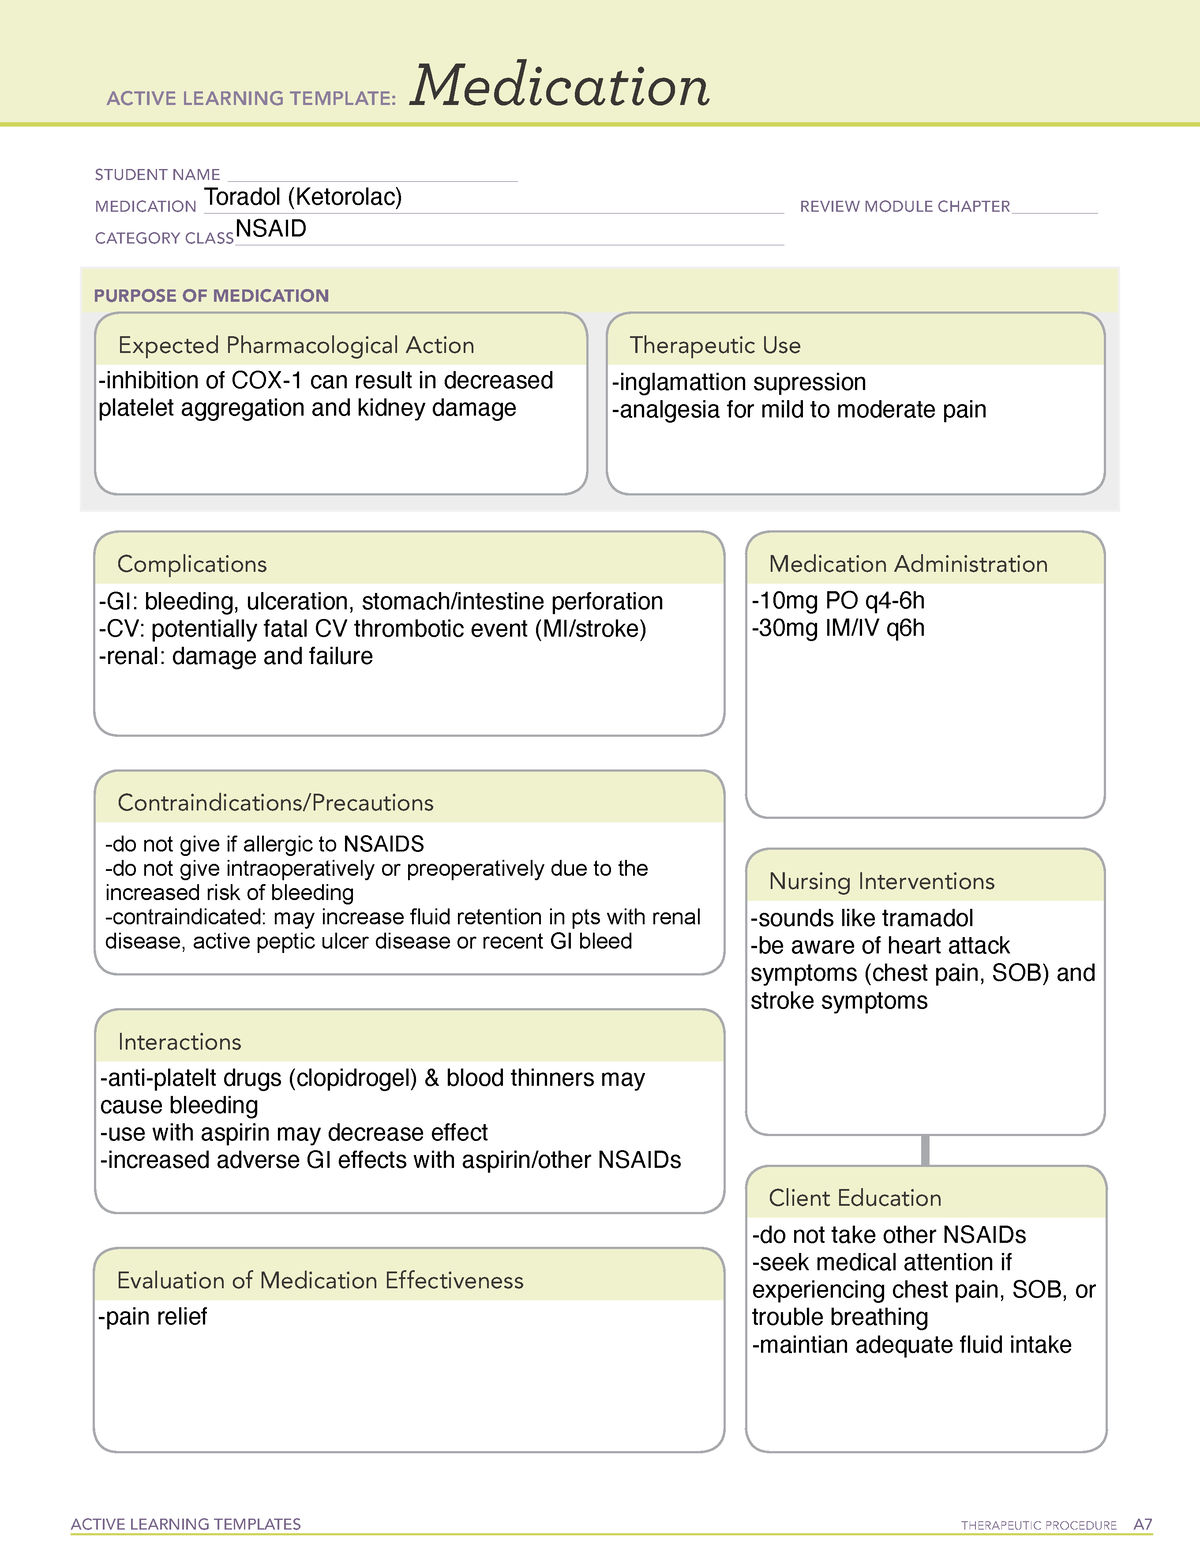 11-toradol-drug-template-active-learning-templates-therapeutic